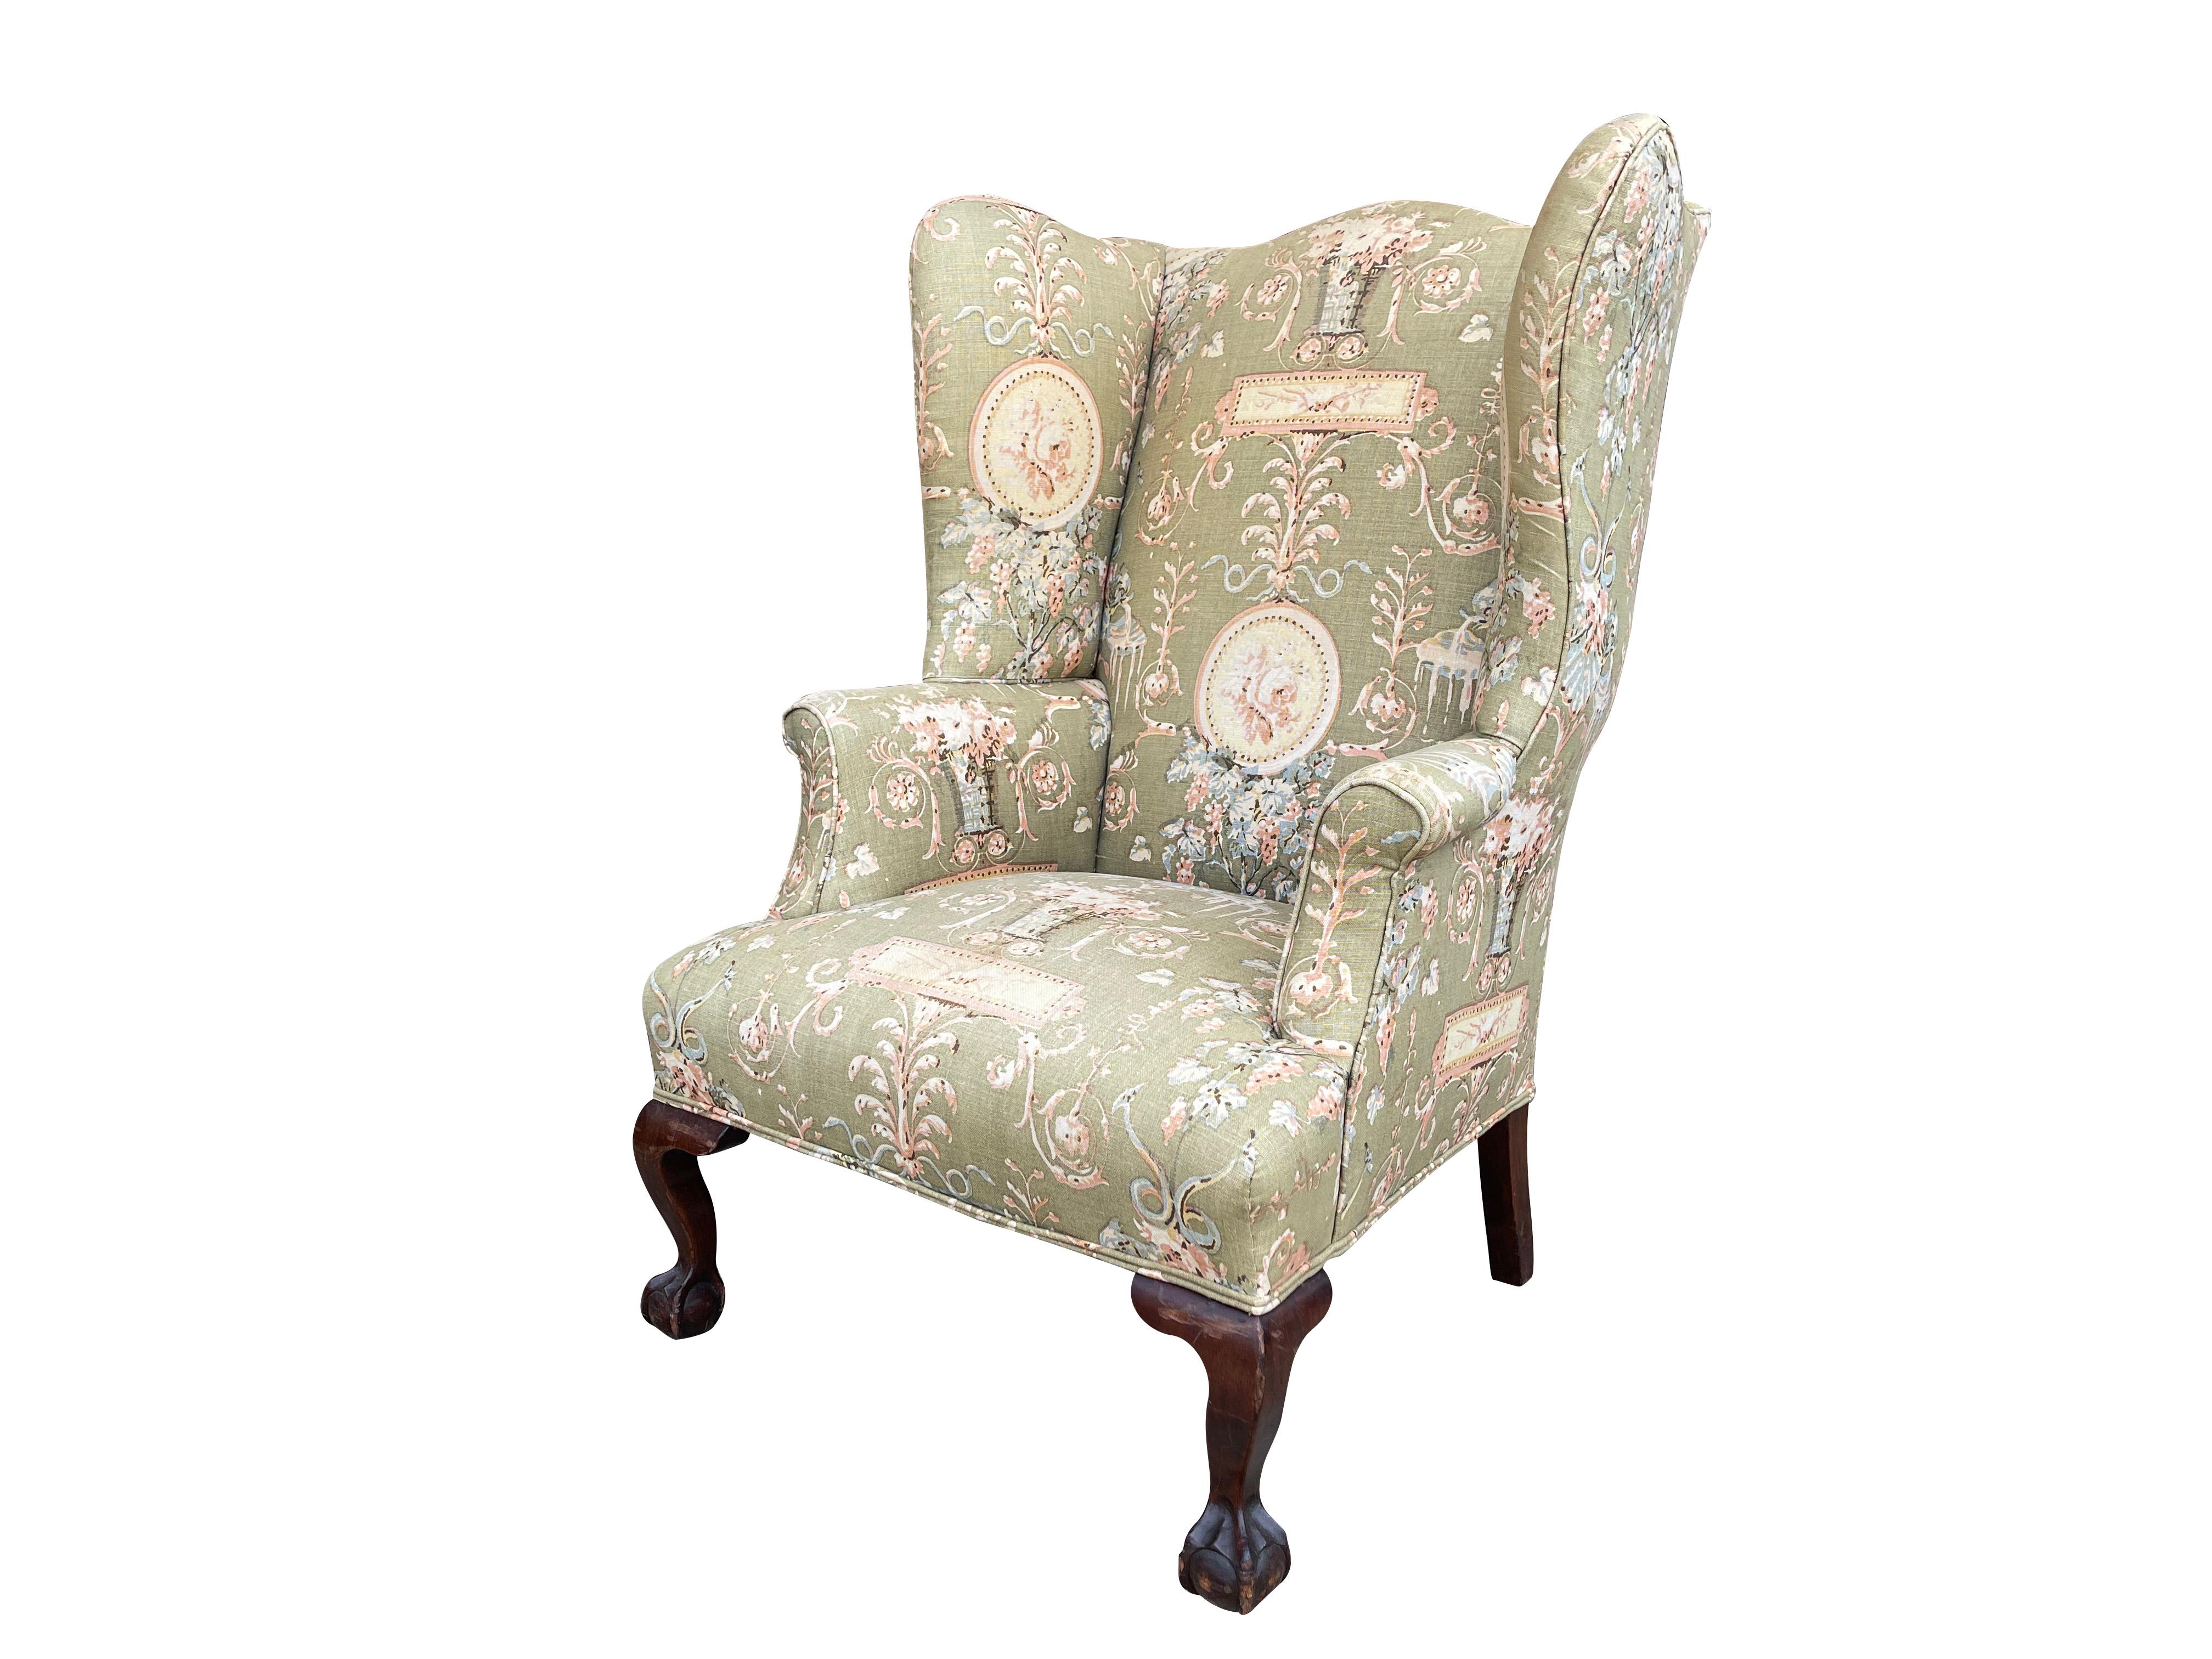 Late 19th Century Antique English Queen Anne Style Upholstered Wingback Chair